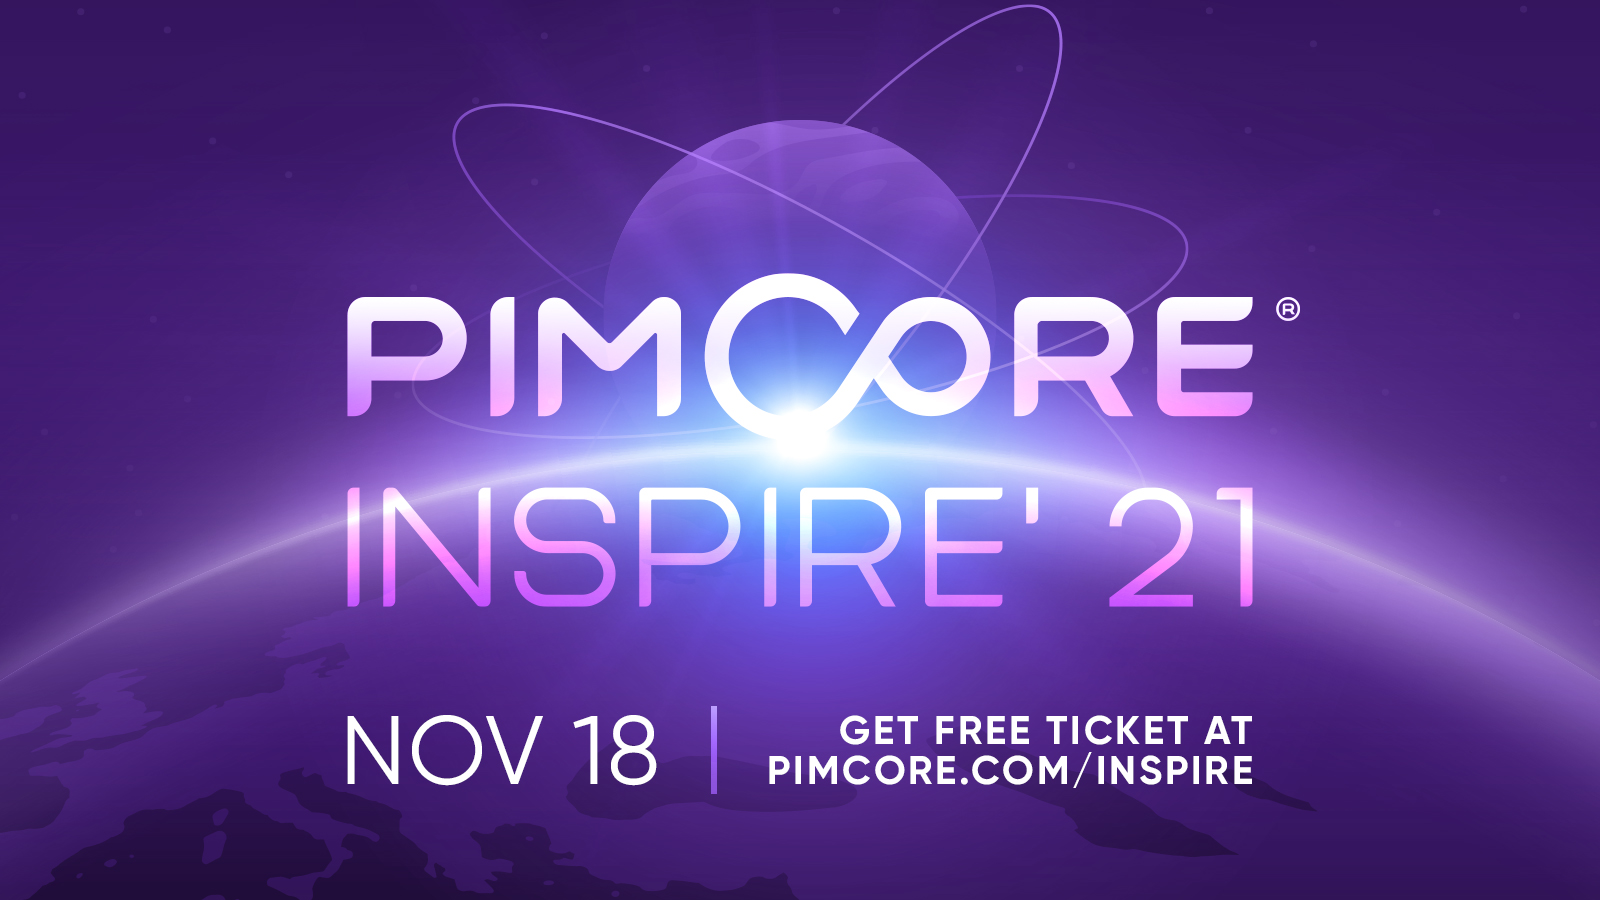 Pimcore Inspire 2021 – The Data & Experience Conference, Online Event